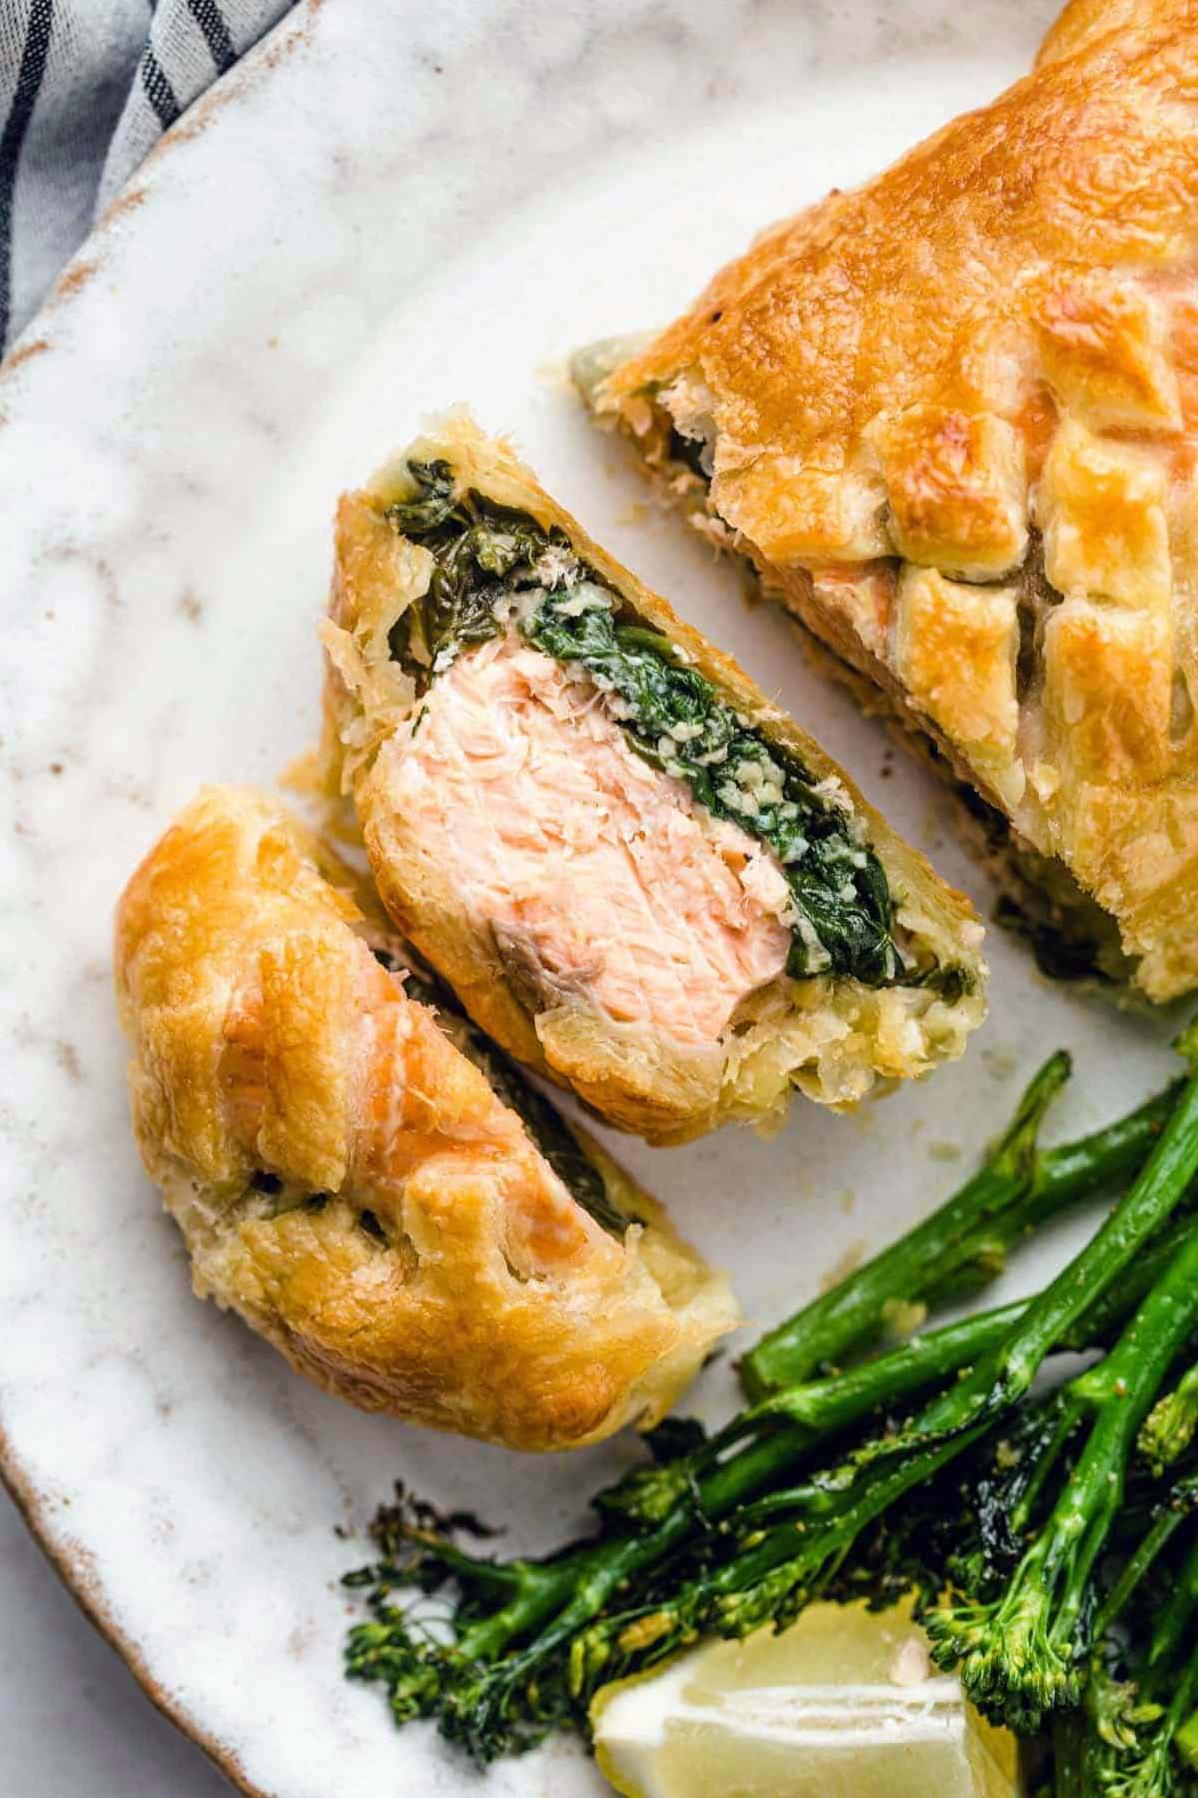  The combination of buttery puff pastry and salmon will make your mouth water.